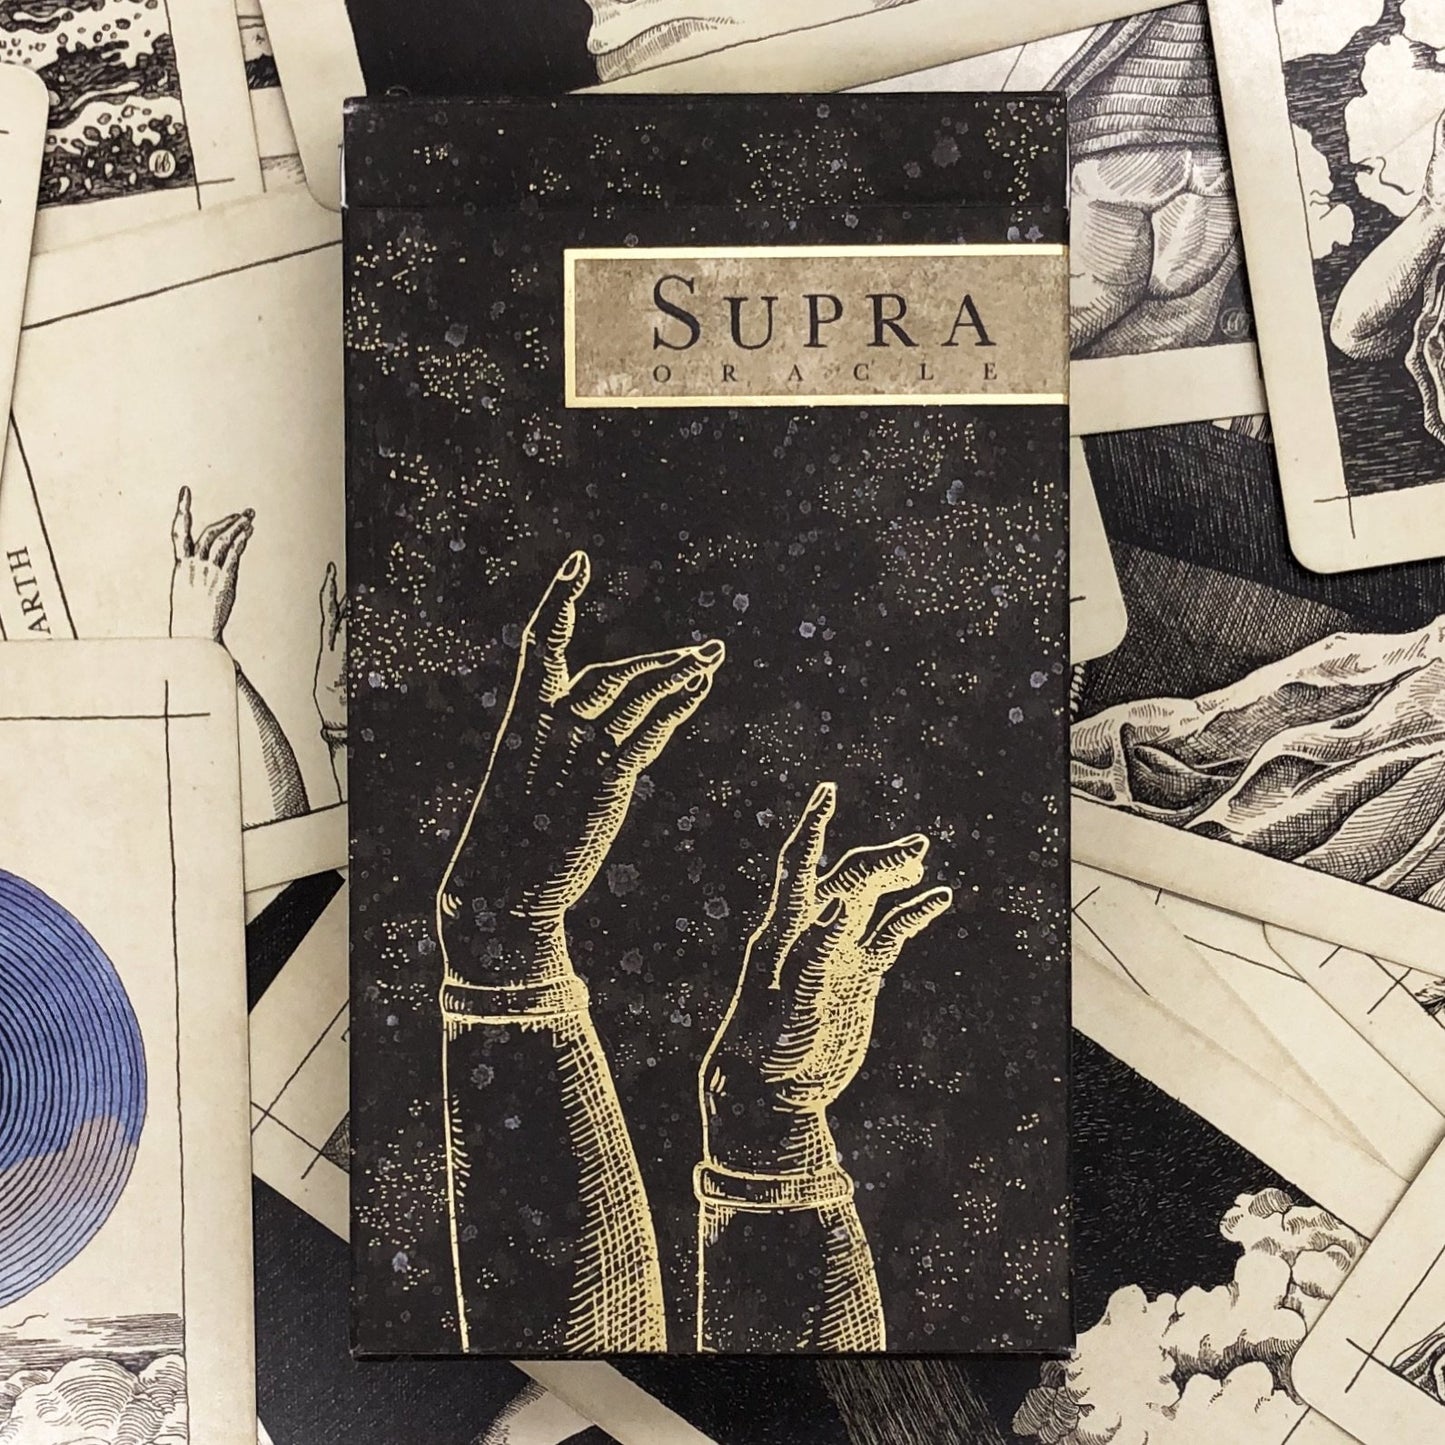 Box cover art of the Supra Oracle deck with collection of cards.